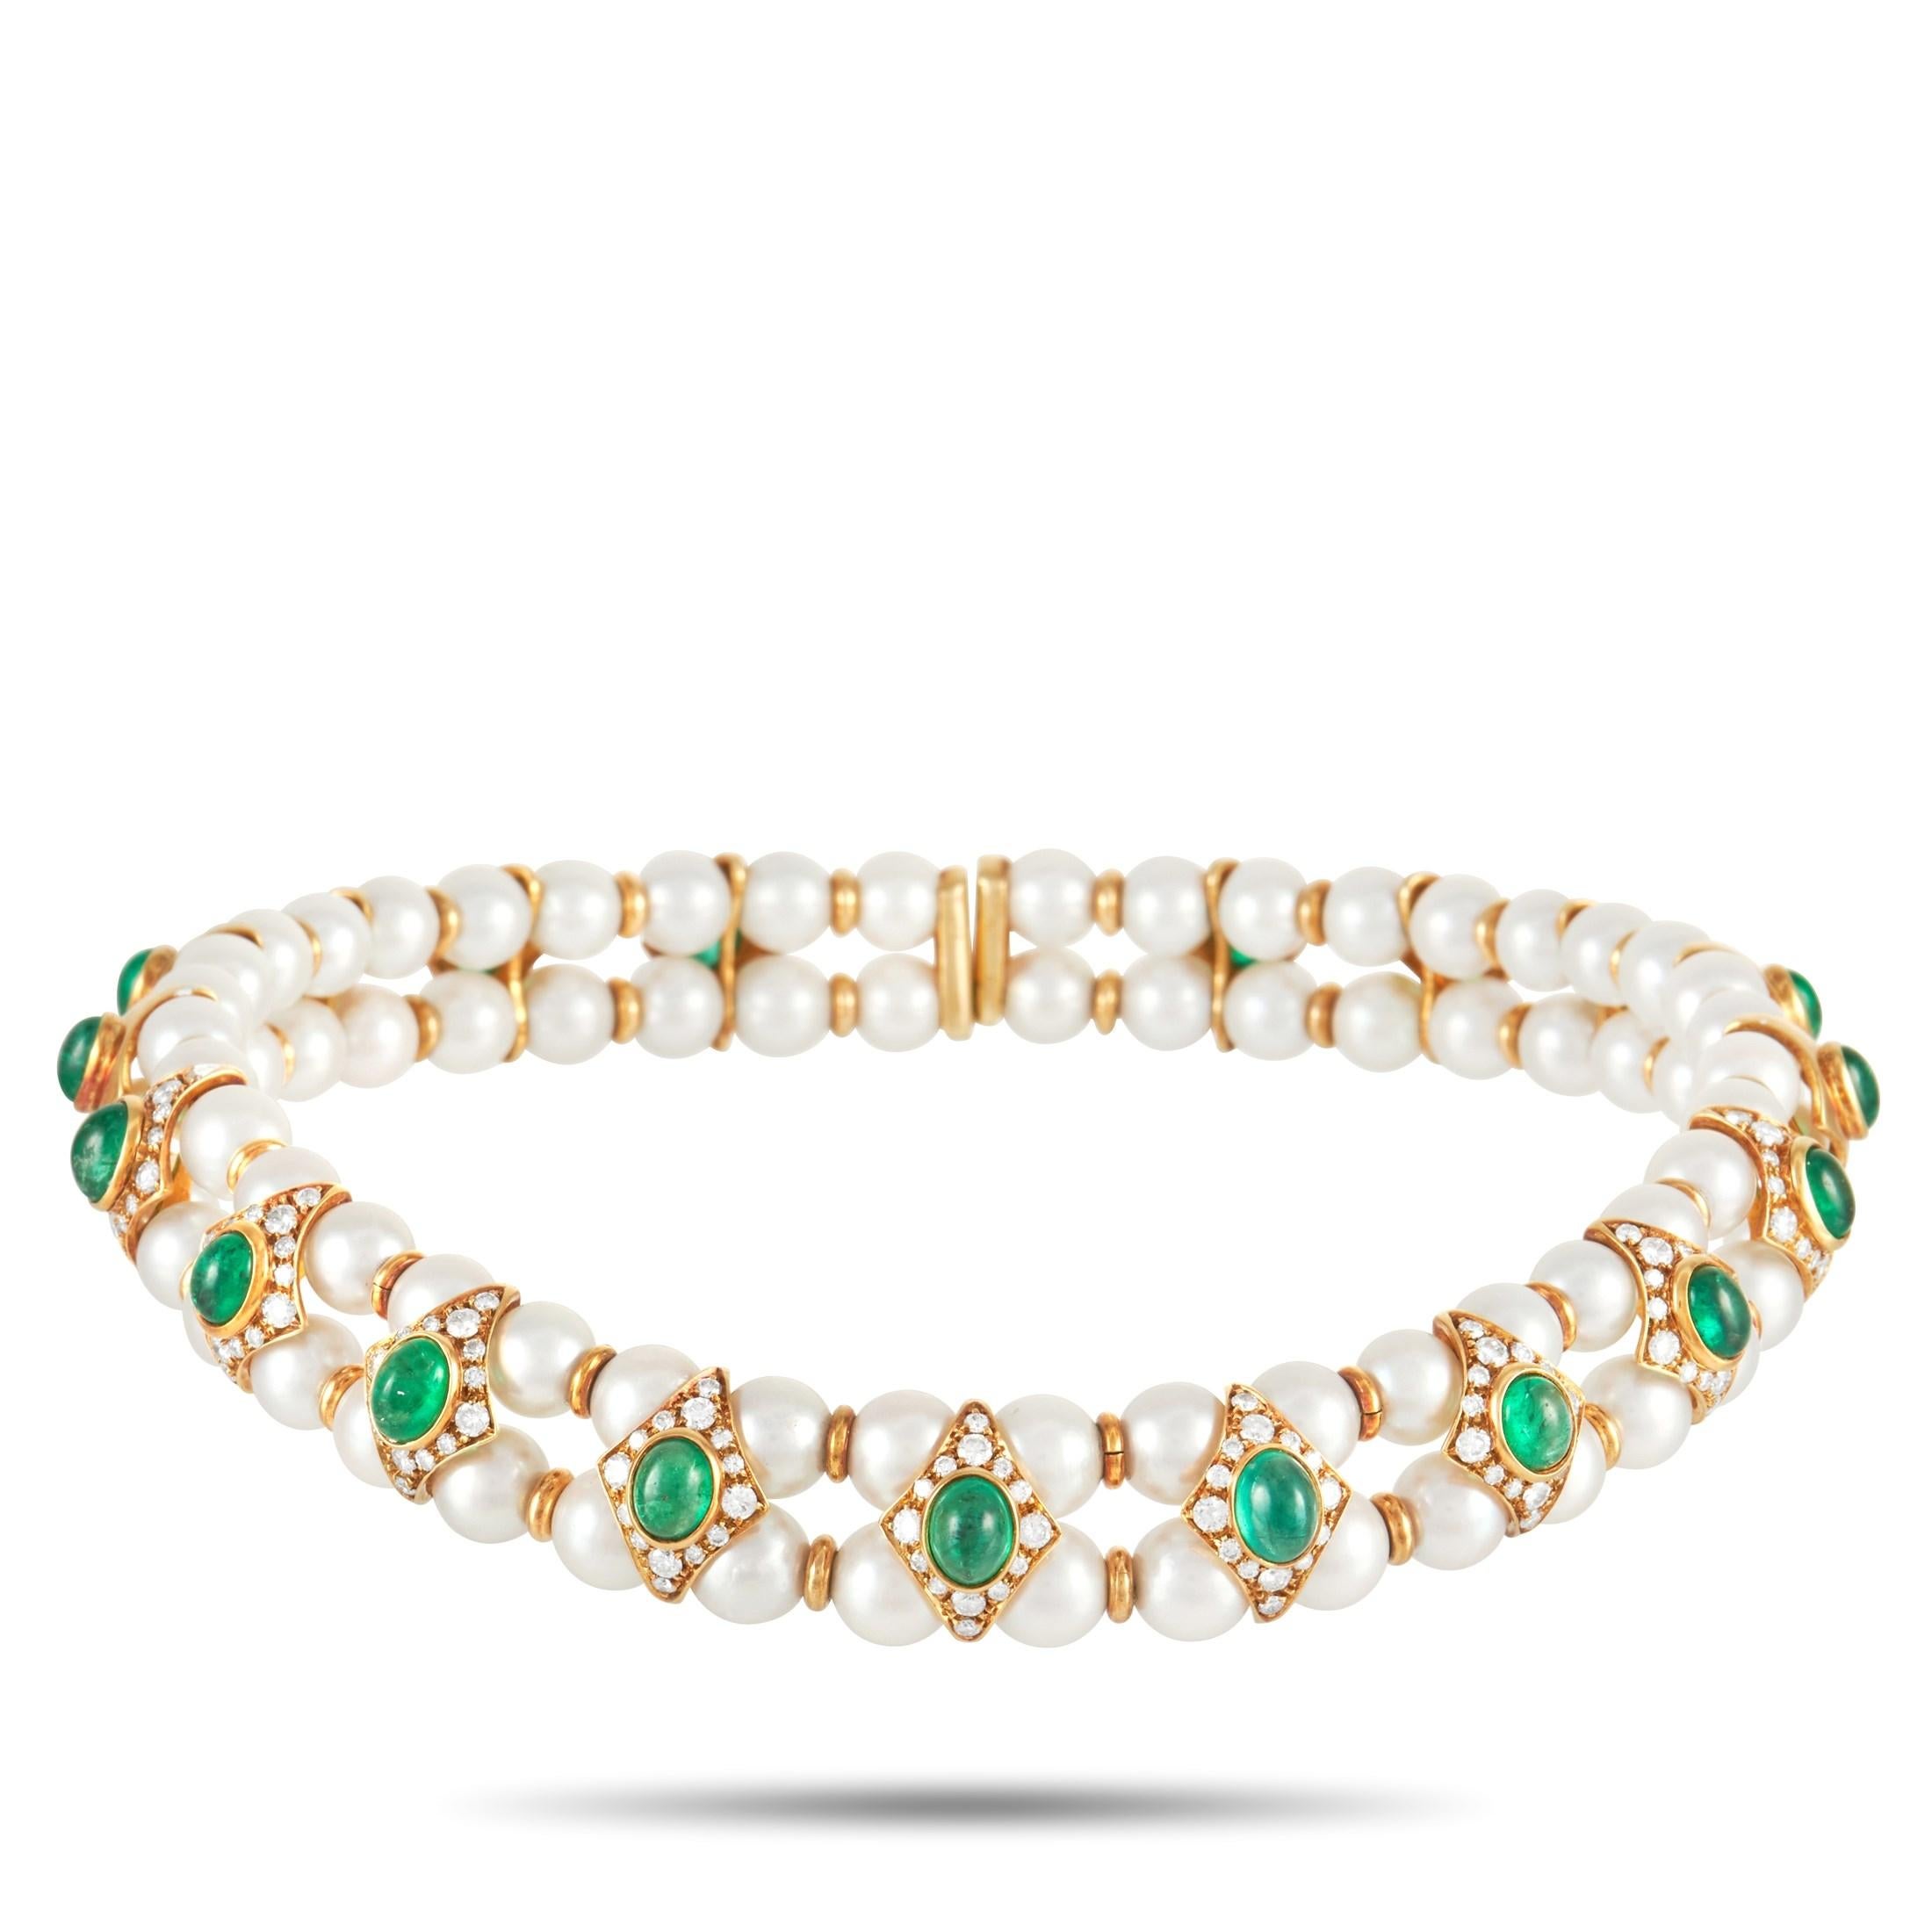 This Fasano choker necklace is fit for modern royalty. It’s comprised of two bands featuring white beadwork set within a deep 18K Yellow Gold setting. Diamond-shaped accents come to life thanks to oval-shaped emeralds totaling 18 carats, which are